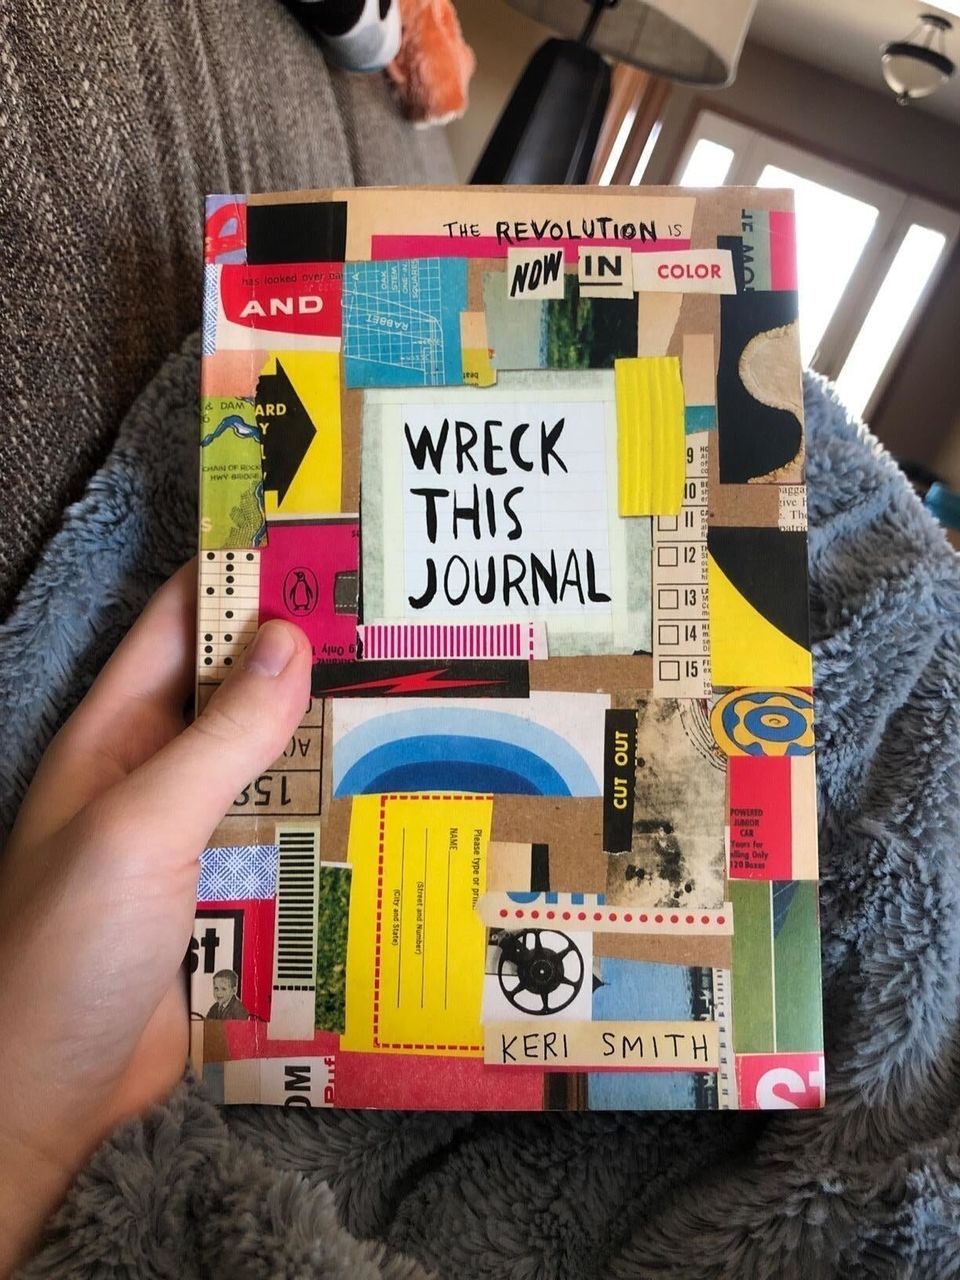 A Wreck This Journal that'll get their creative side flowing